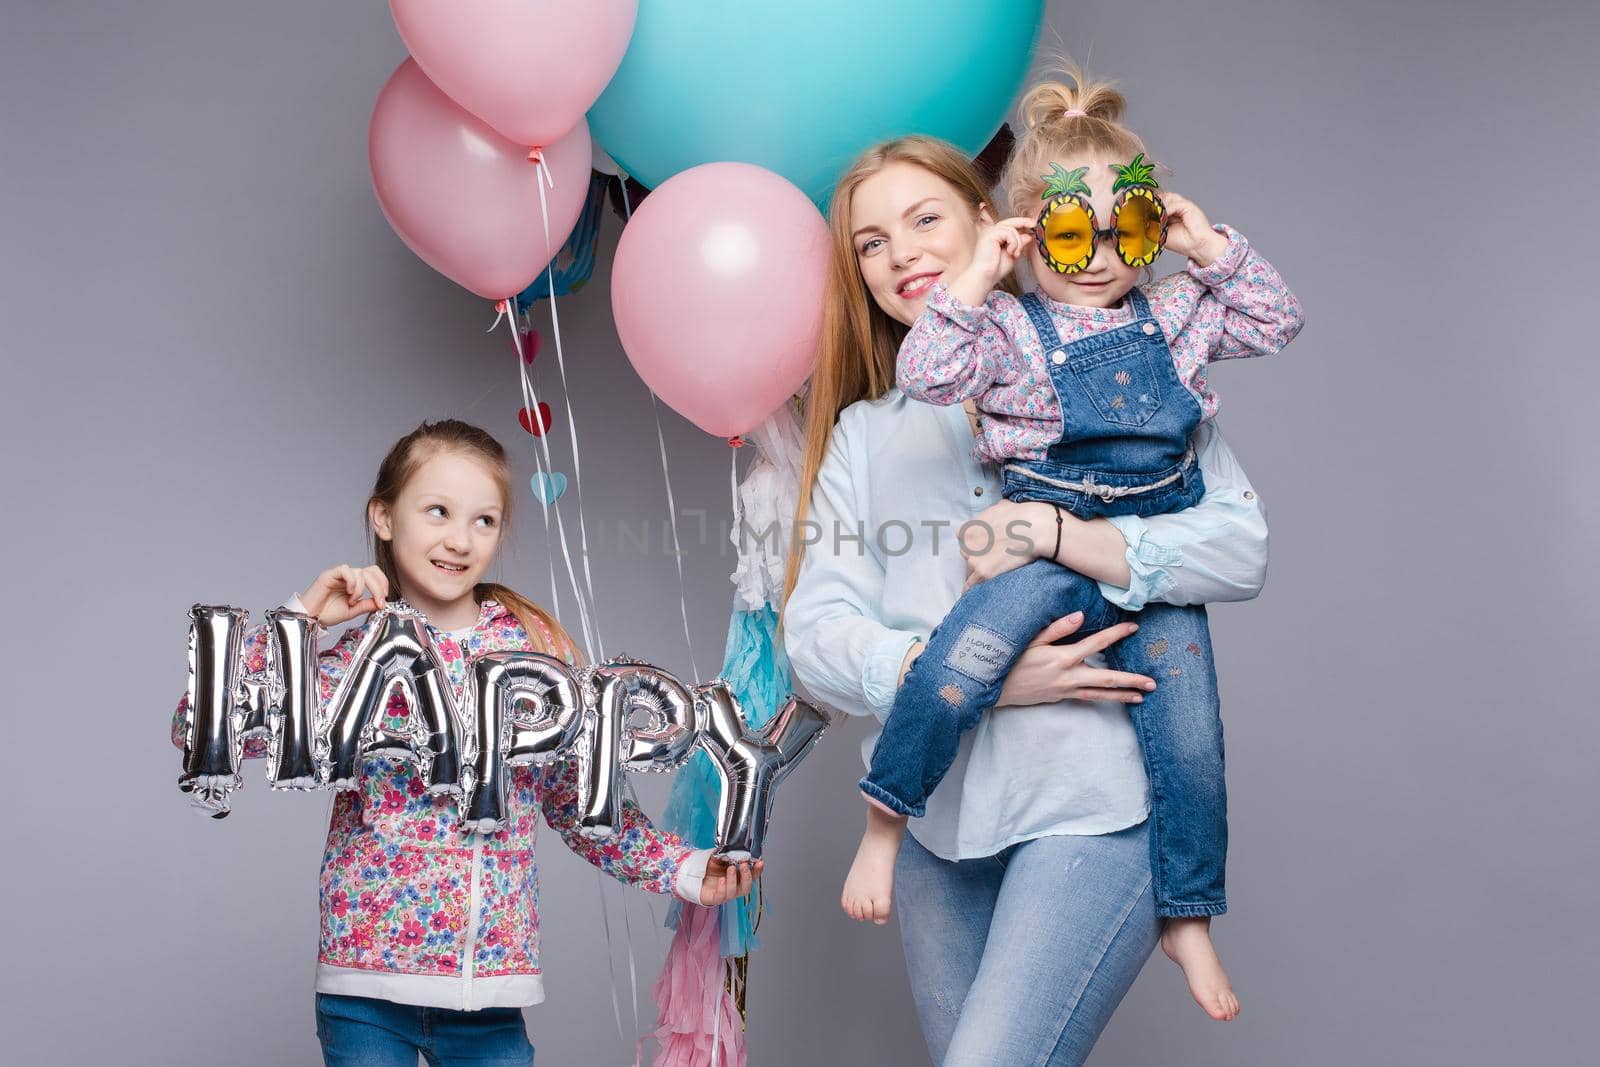 the child in the arms of his mother on a white background. A woman with a child in her arms holding festive balloons